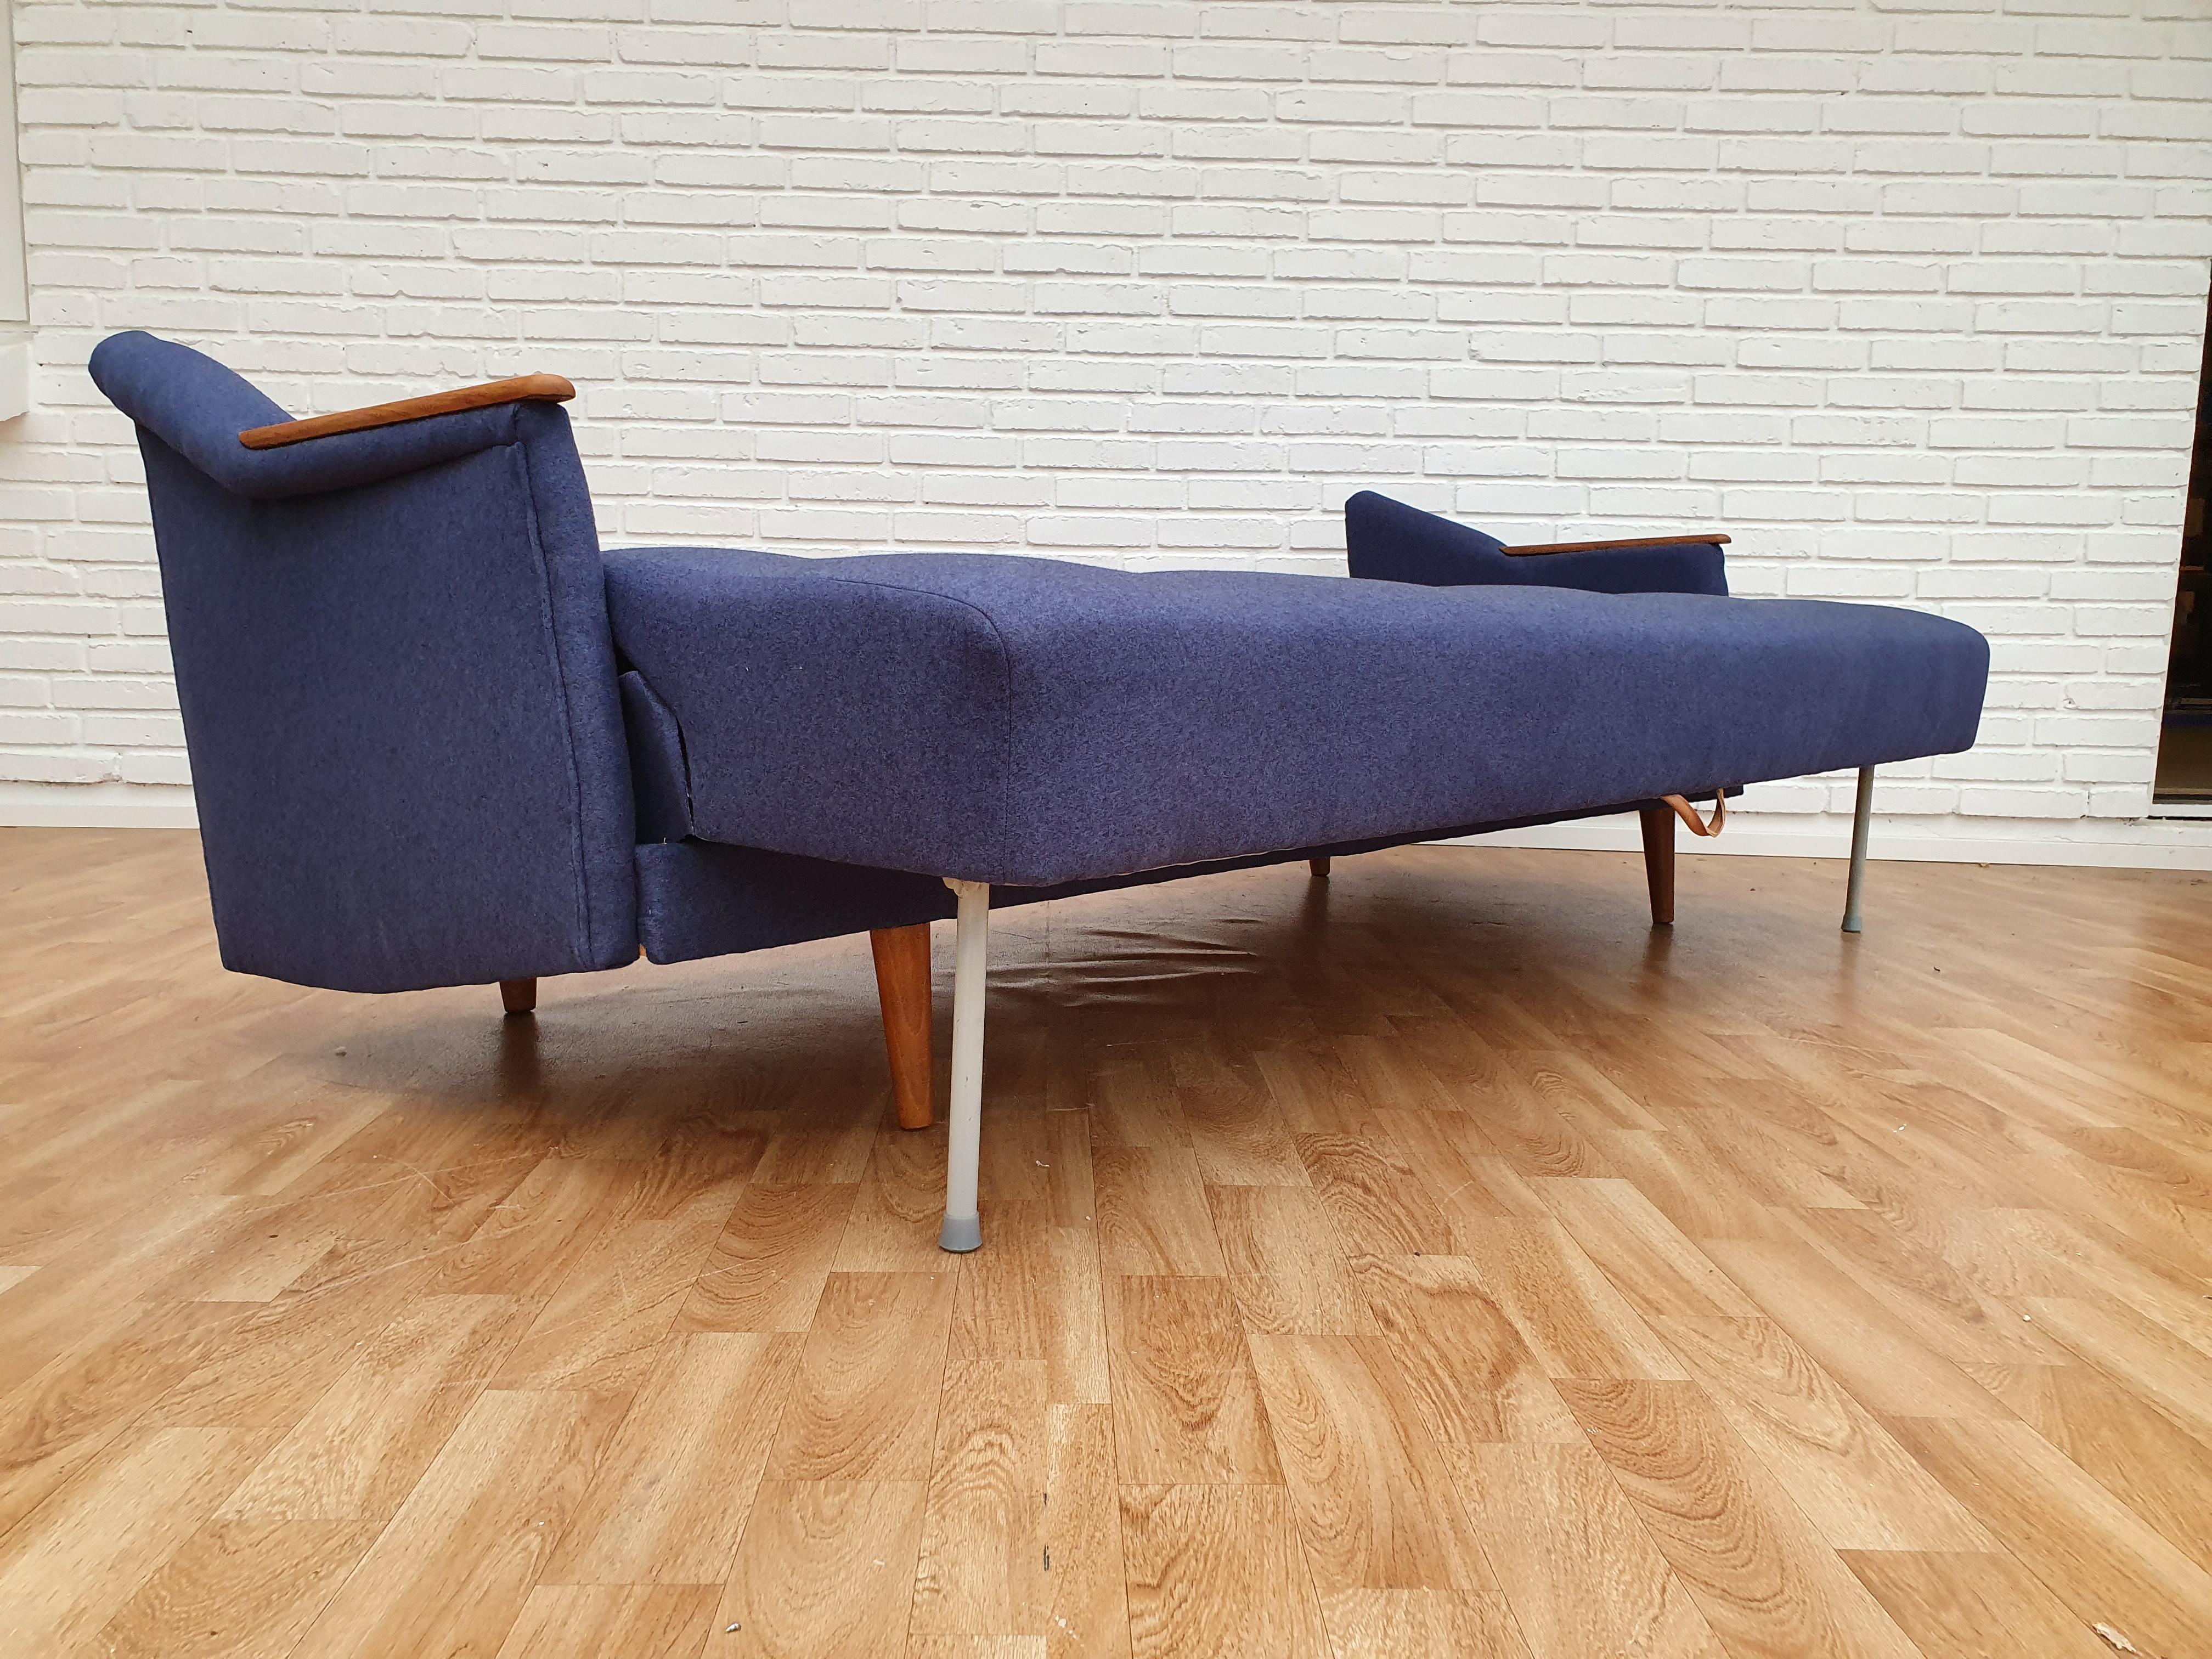 Danish Designed, 3 Persons Sofa Bed, 1960s, Completely Restored im Angebot 2